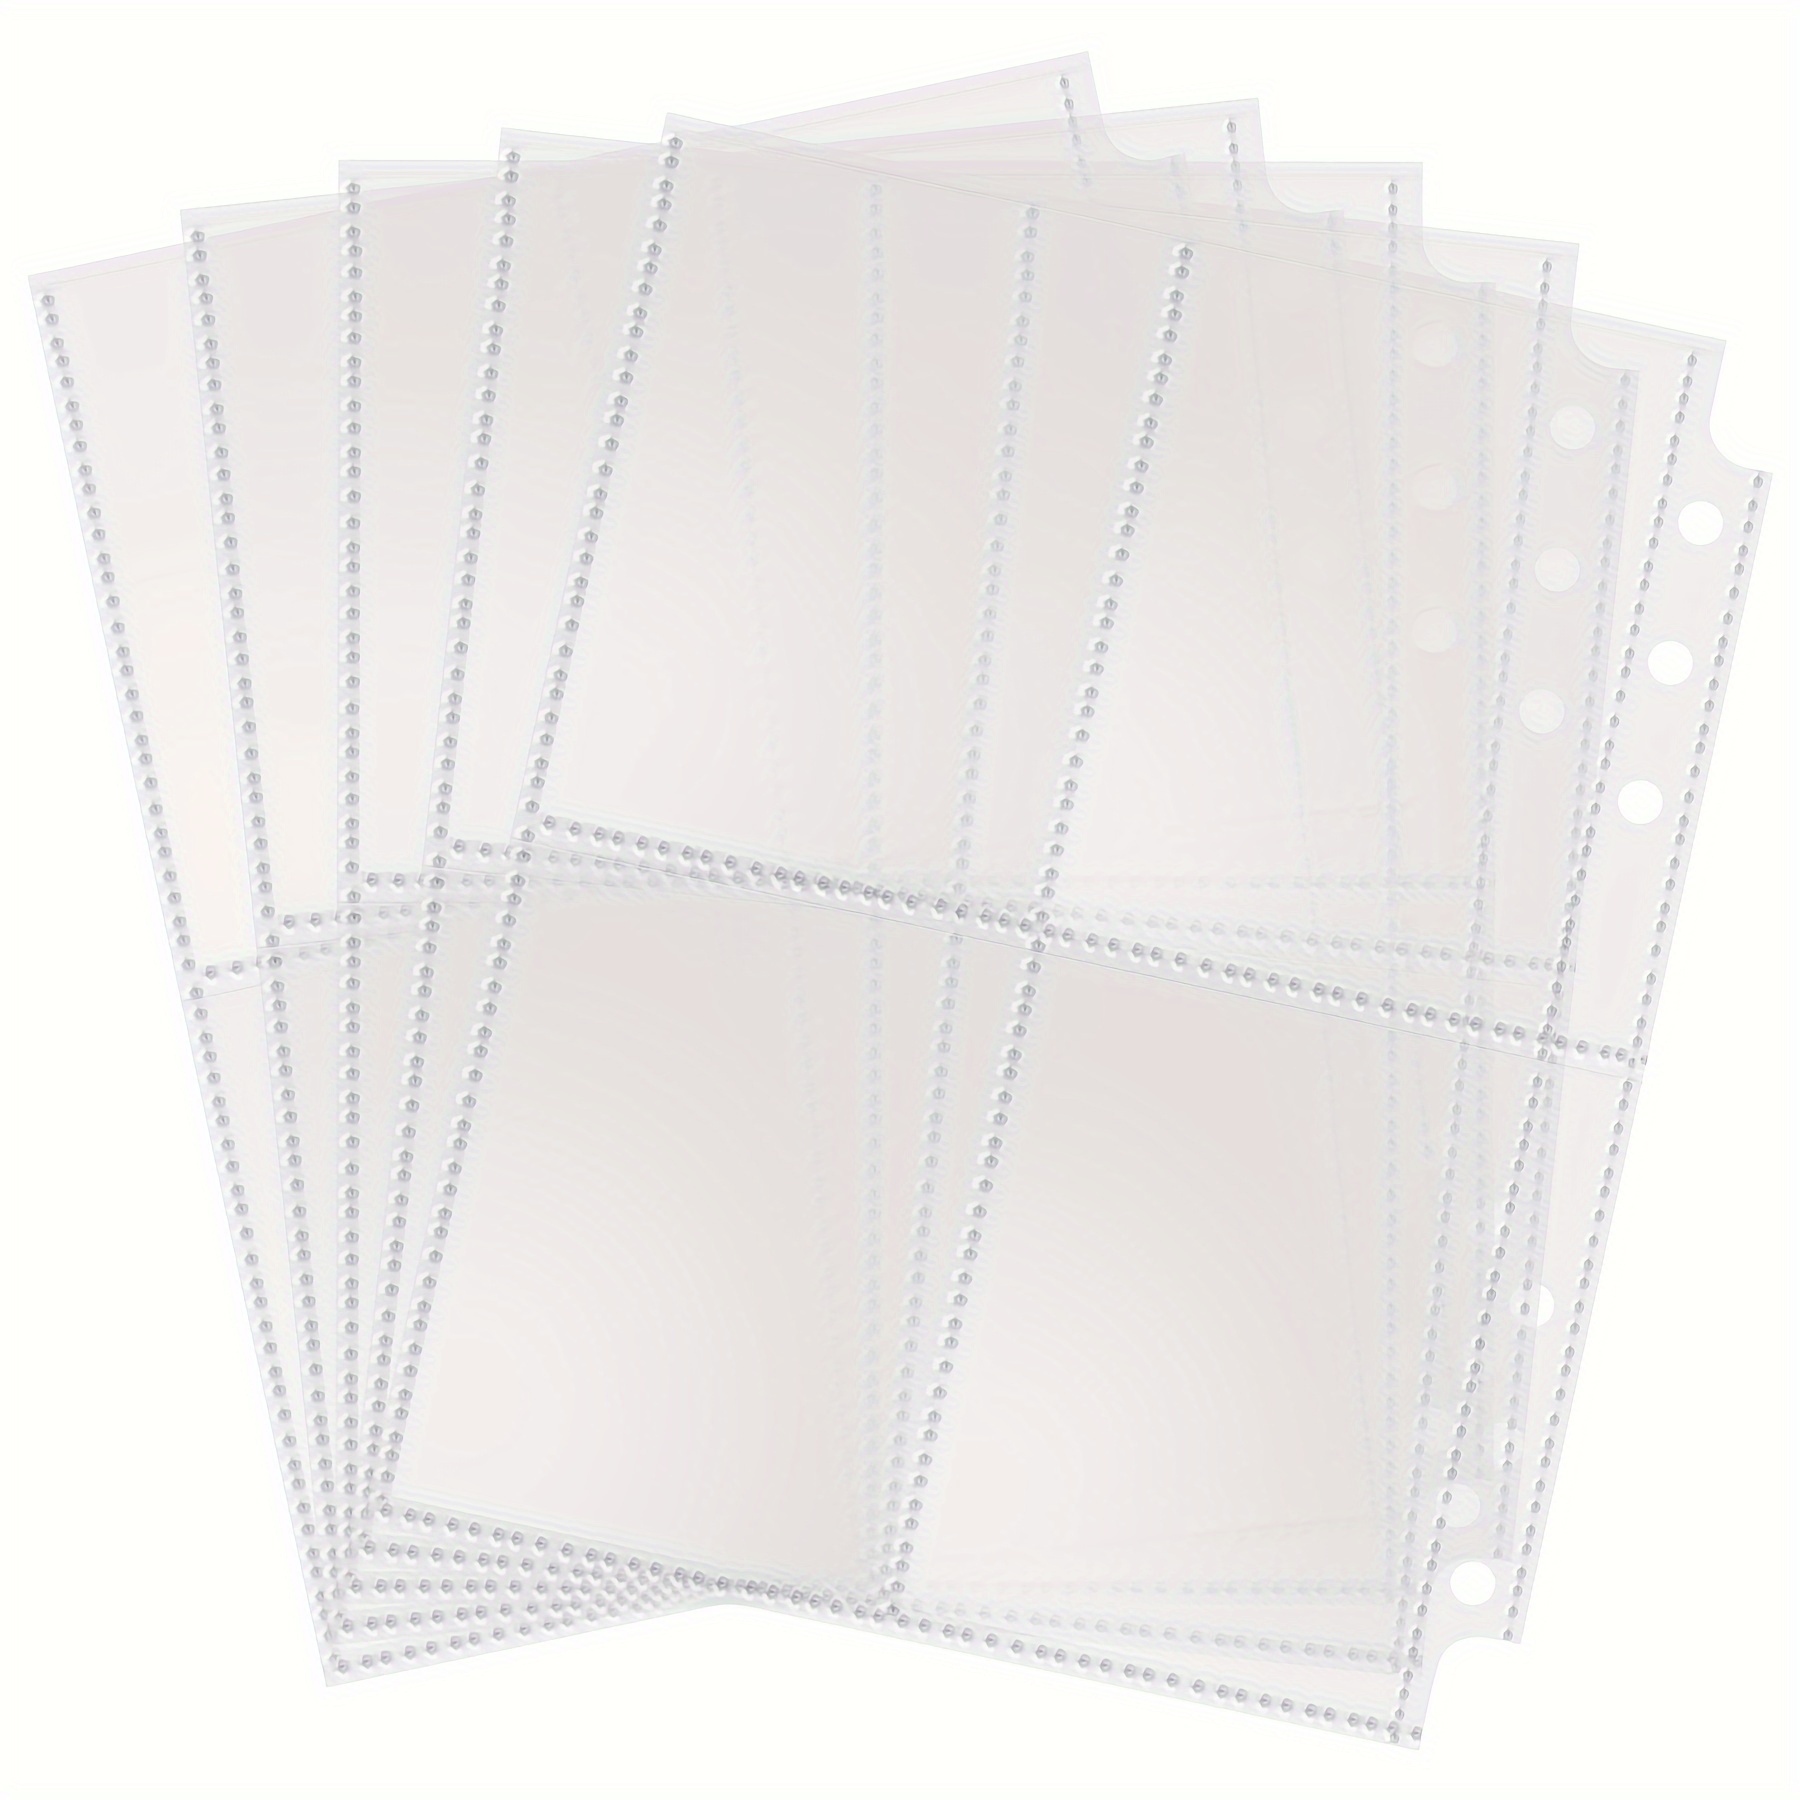  A5 Photocard Binder with 25 Pcs Inner 6 Ring, Clear K